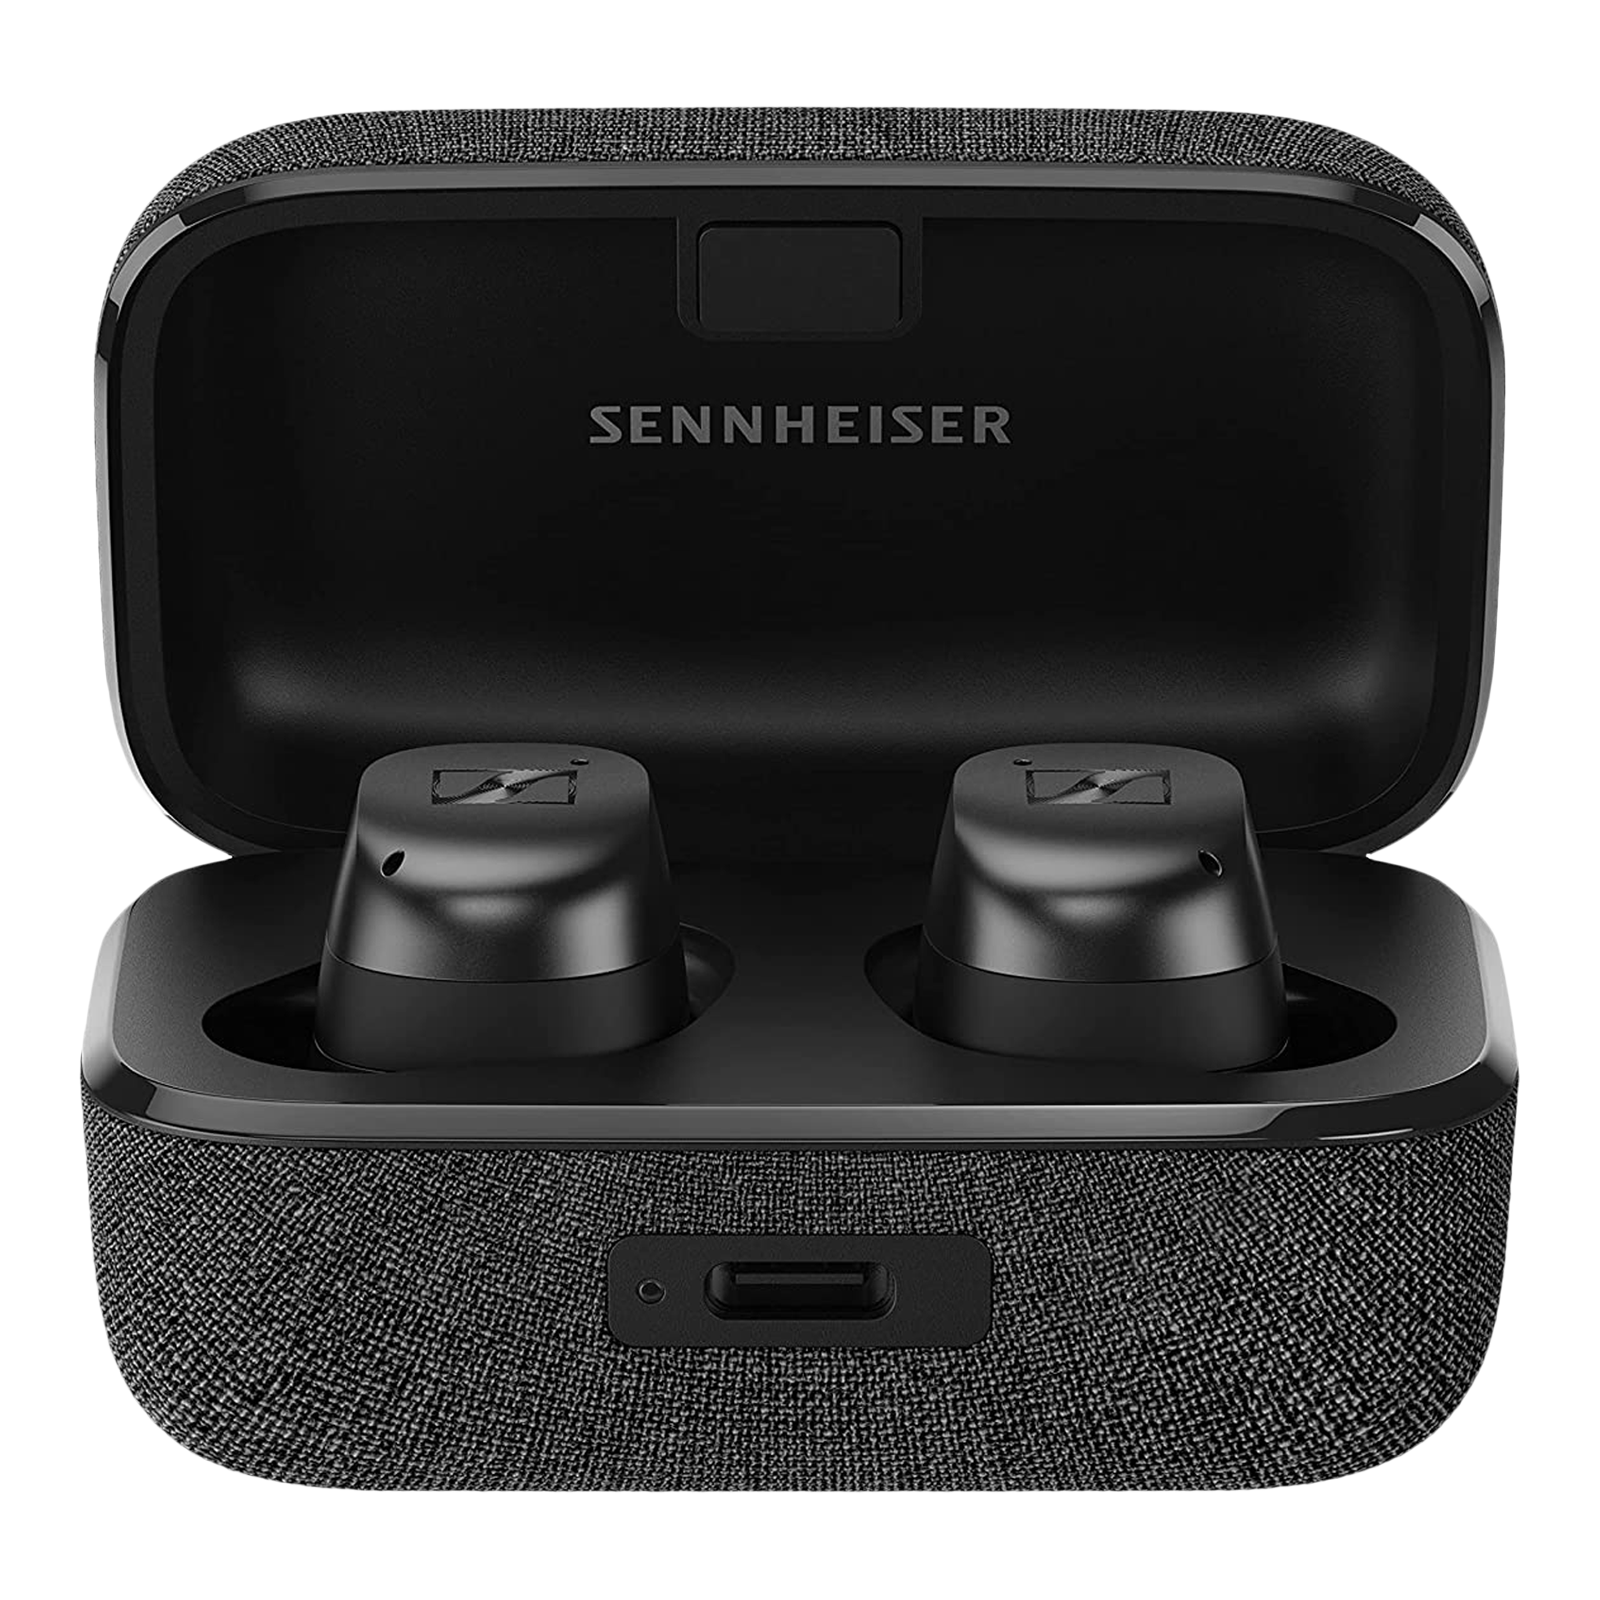 SENNHEISER MTW3 TWS Earbuds with Active Noise Cancellation (IPX4 Splash Resistant, 28 Hours Playback, Graphite)